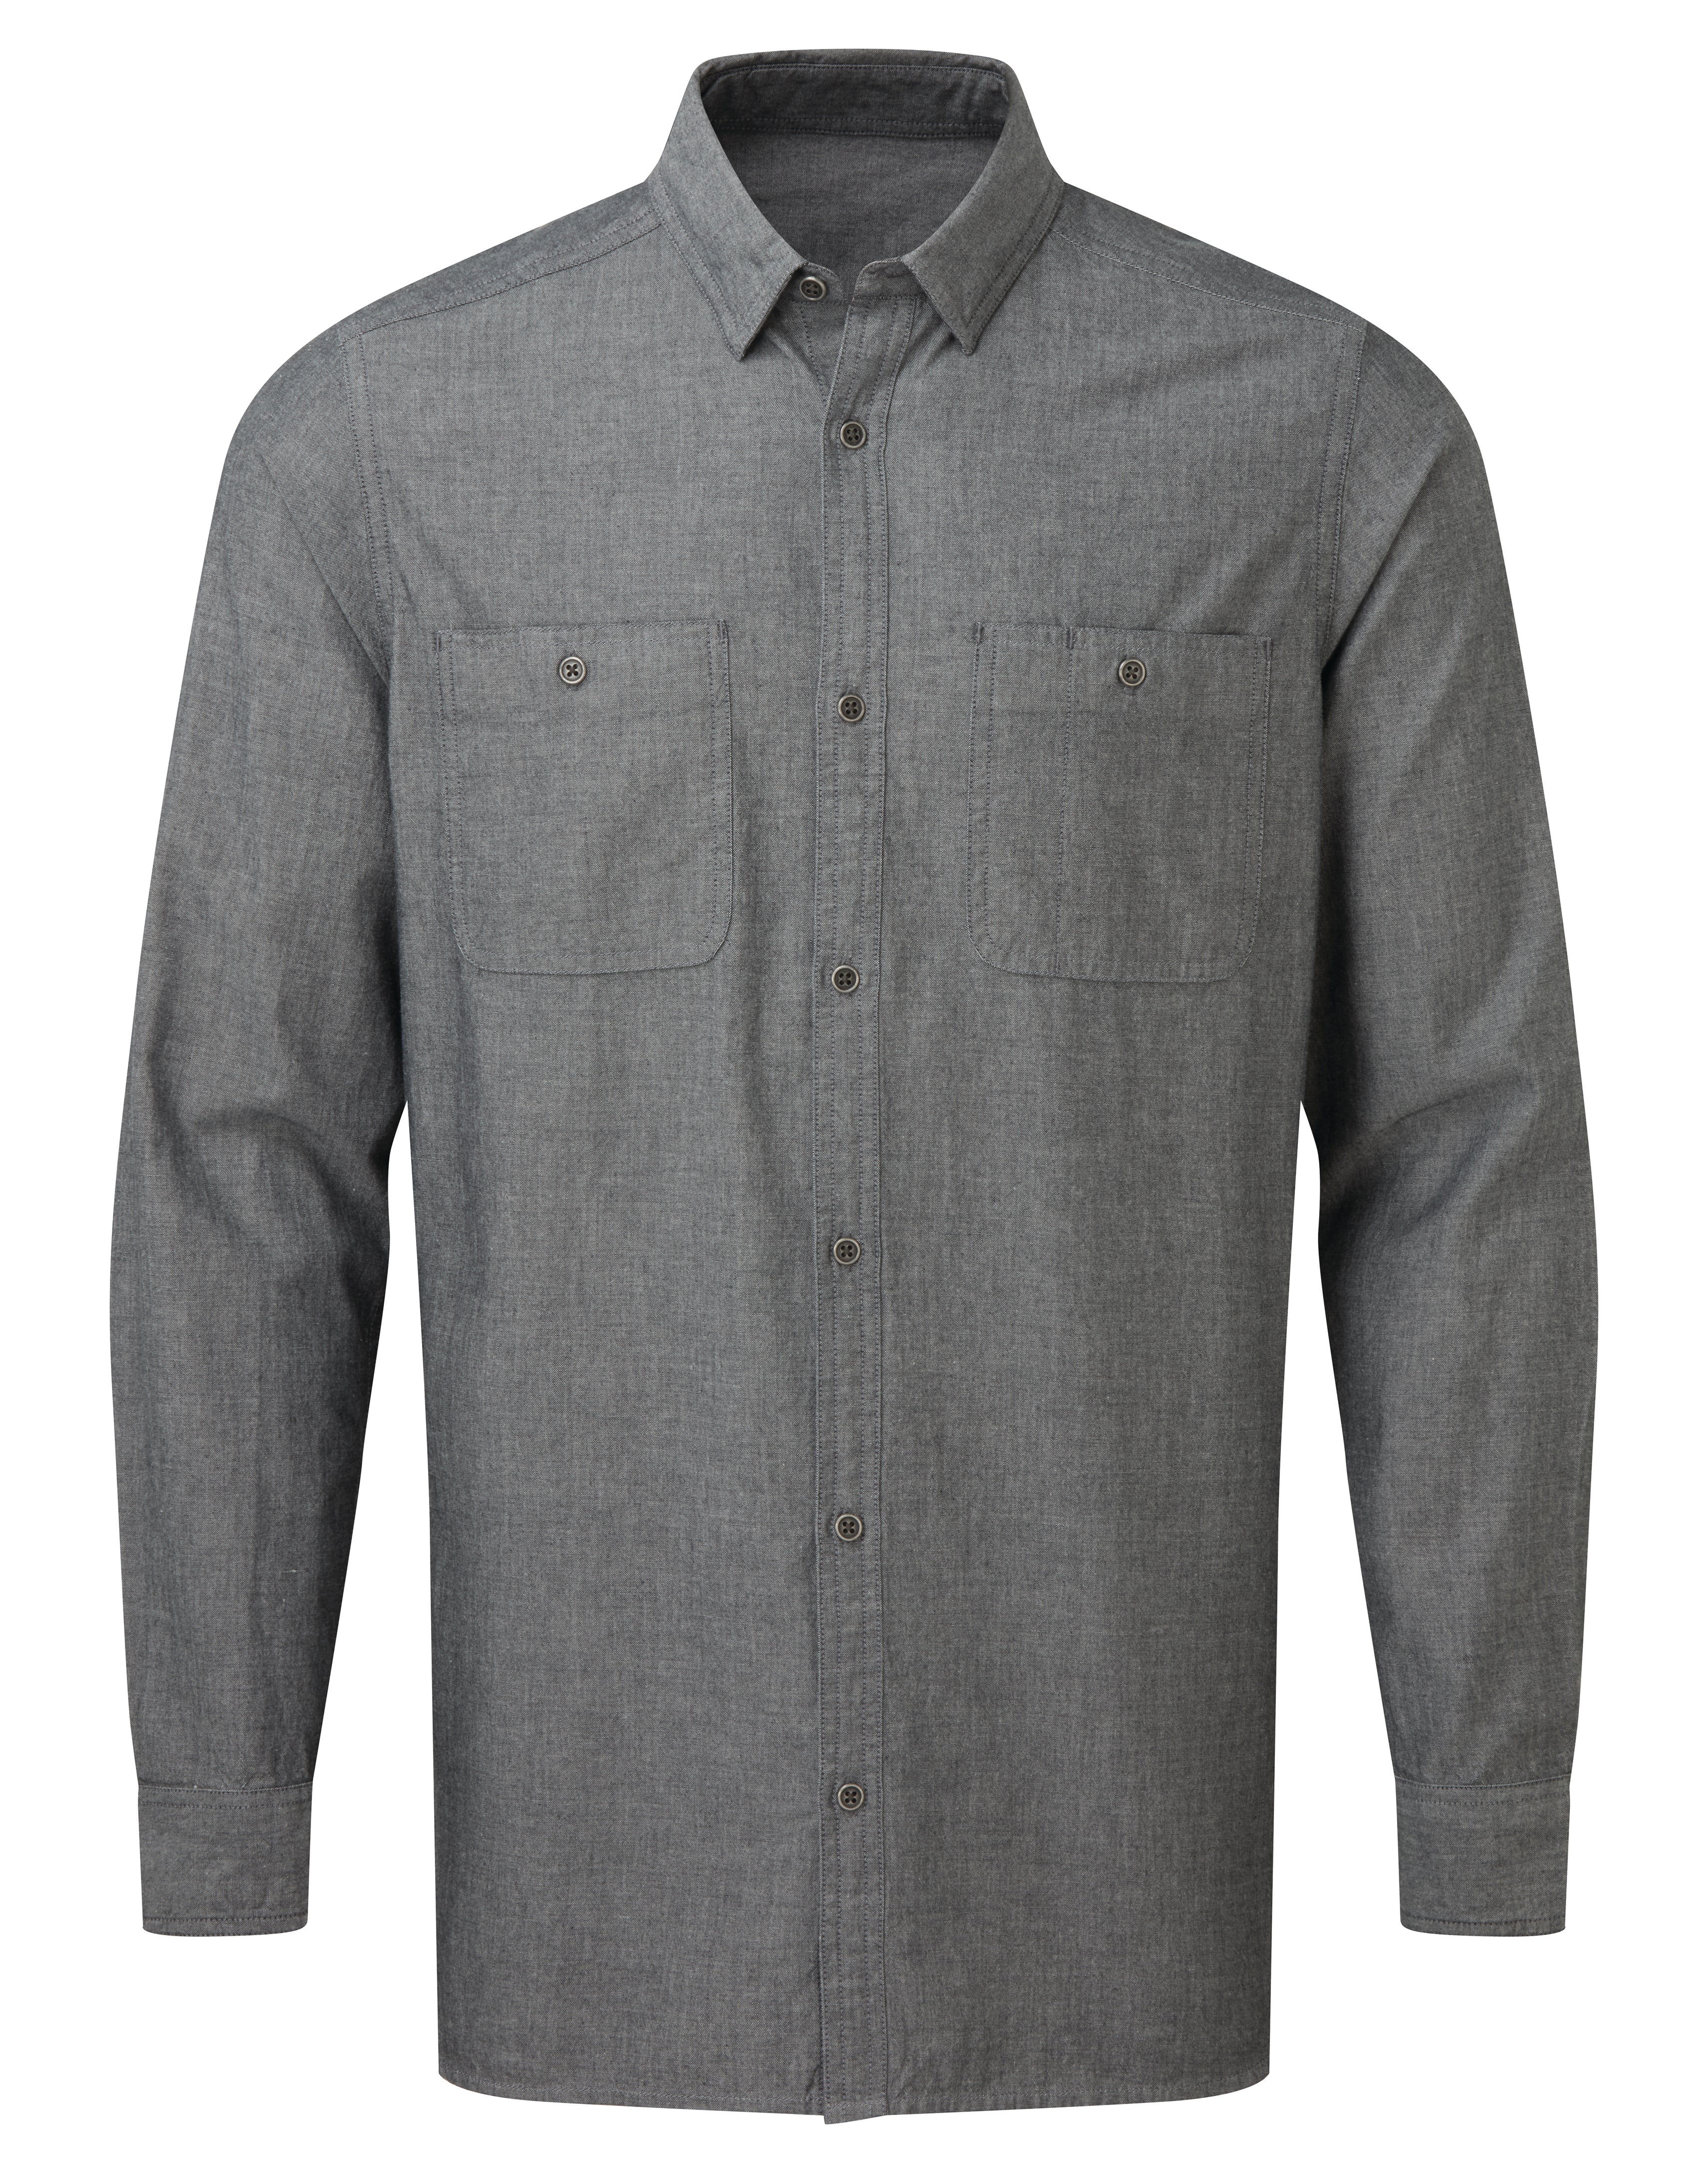 Men’s Chambray shirt, organic and Fairtrade certified - Premier Collection